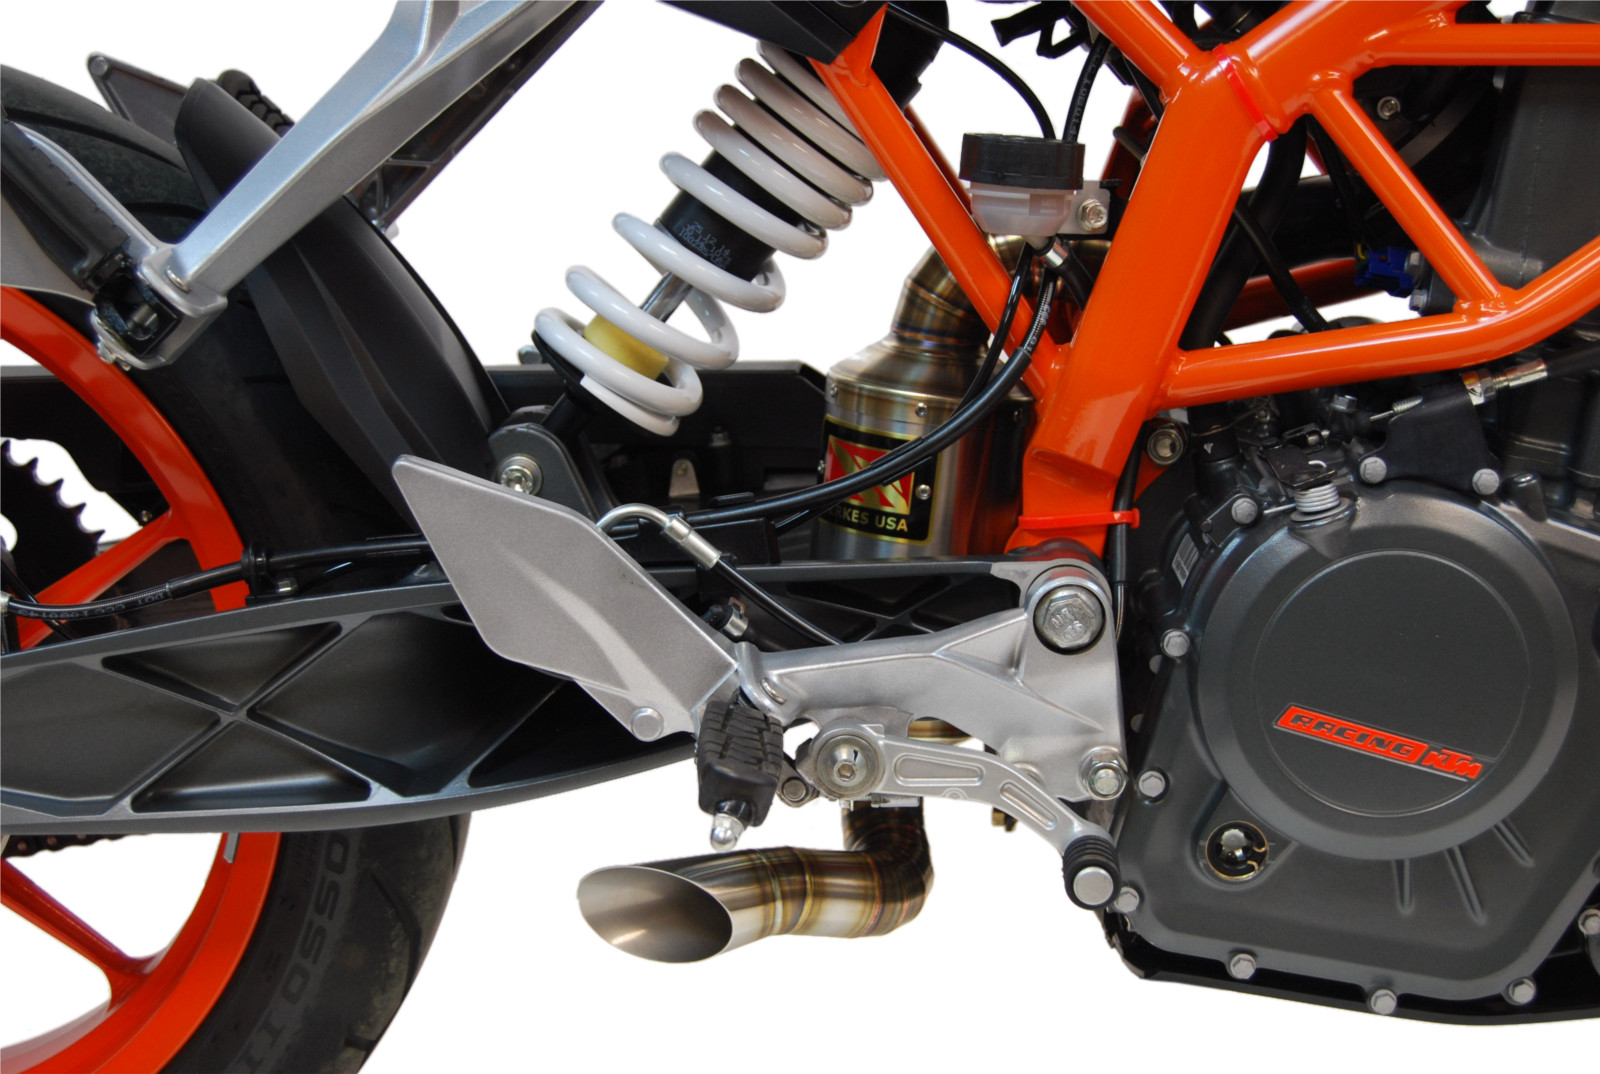 GP Slip On Exhaust - for 15-16 KTM Duke & RC 390 - Click Image to Close